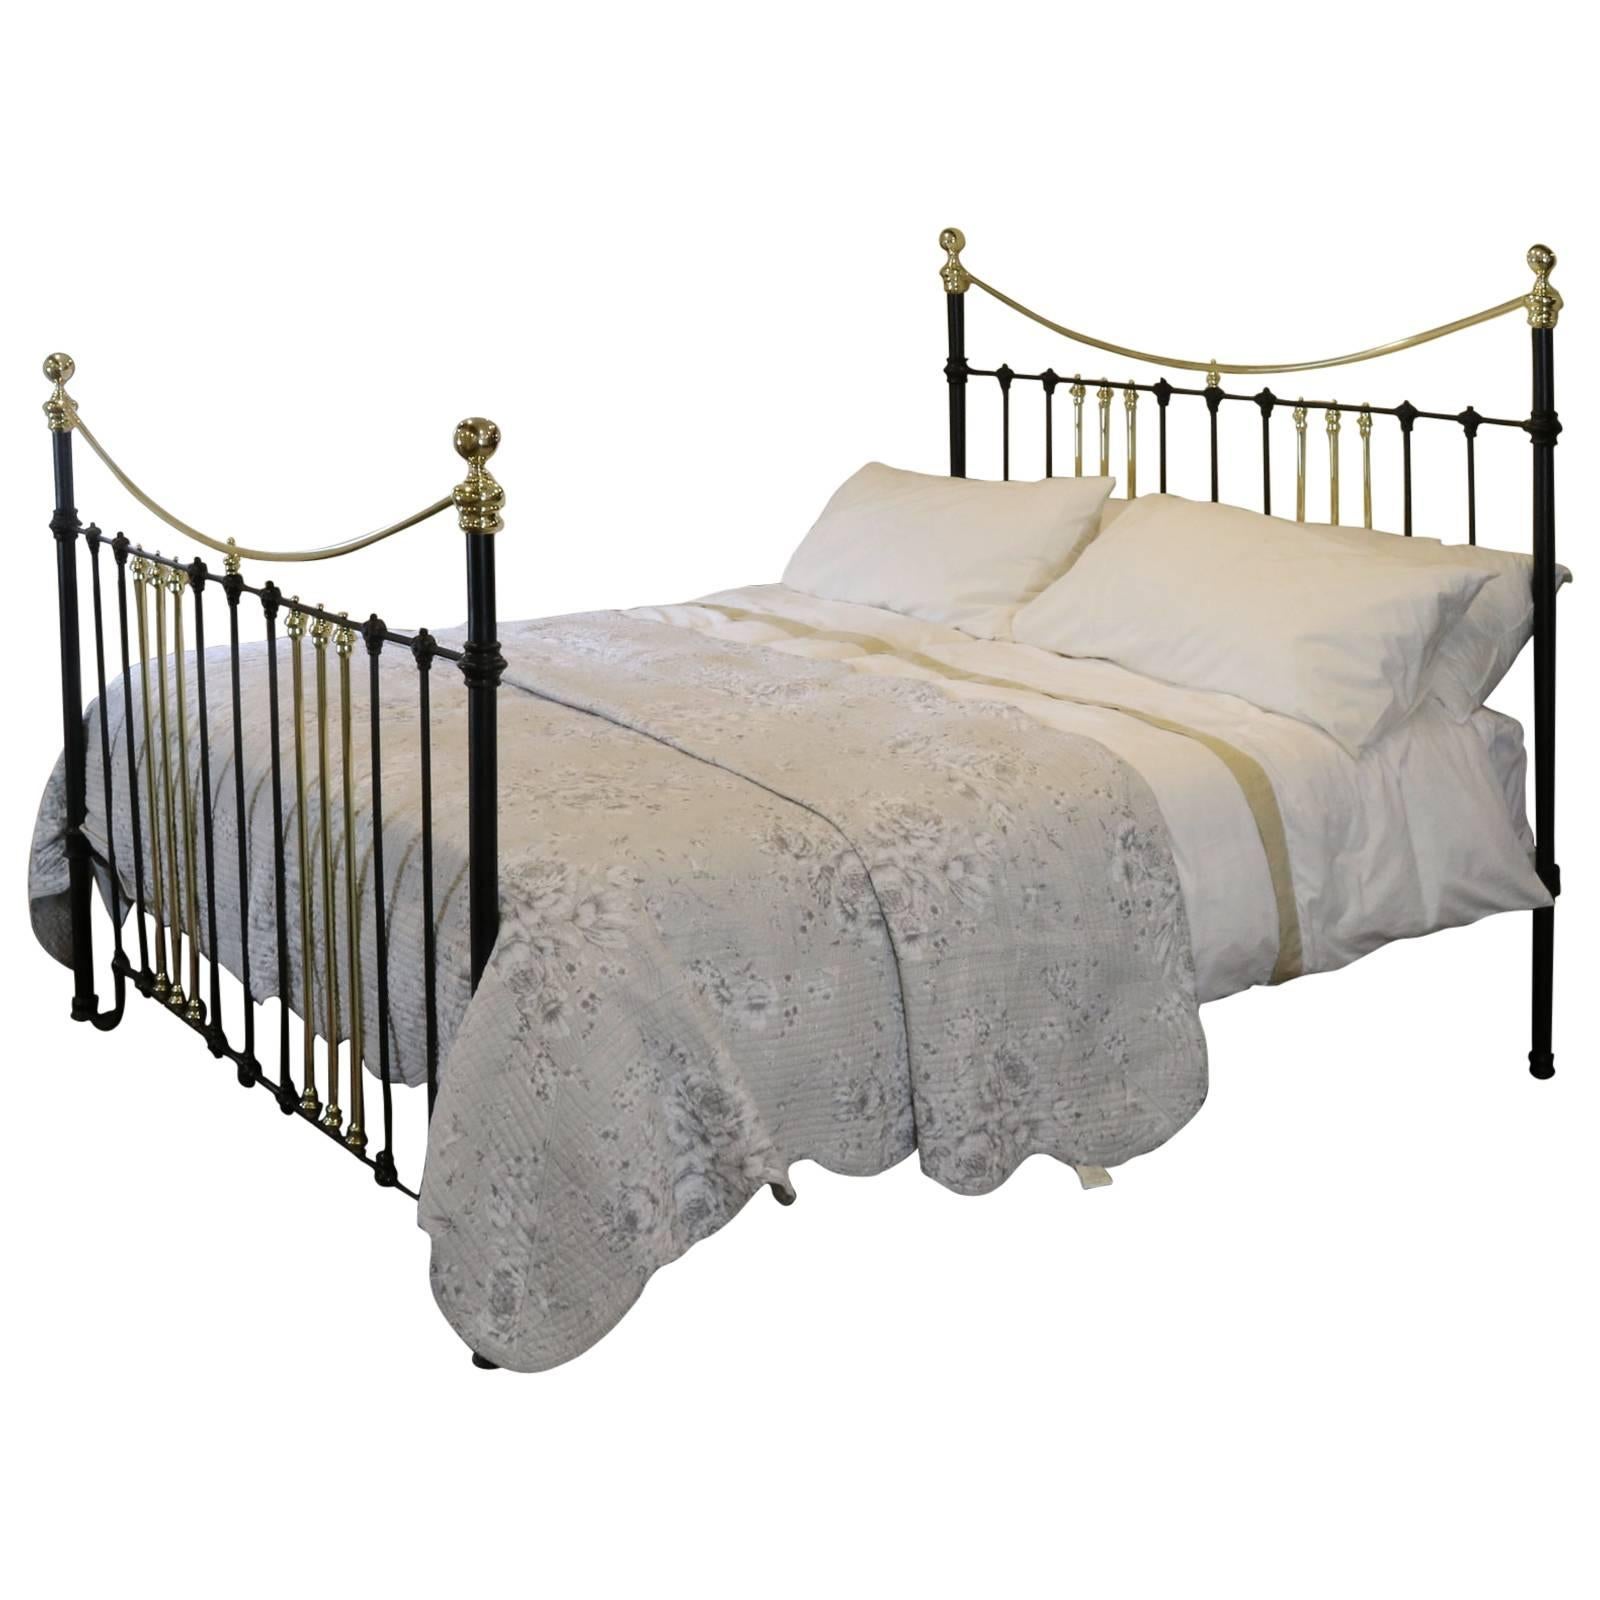 Brass and Iron Extra Wide Bed MSK24